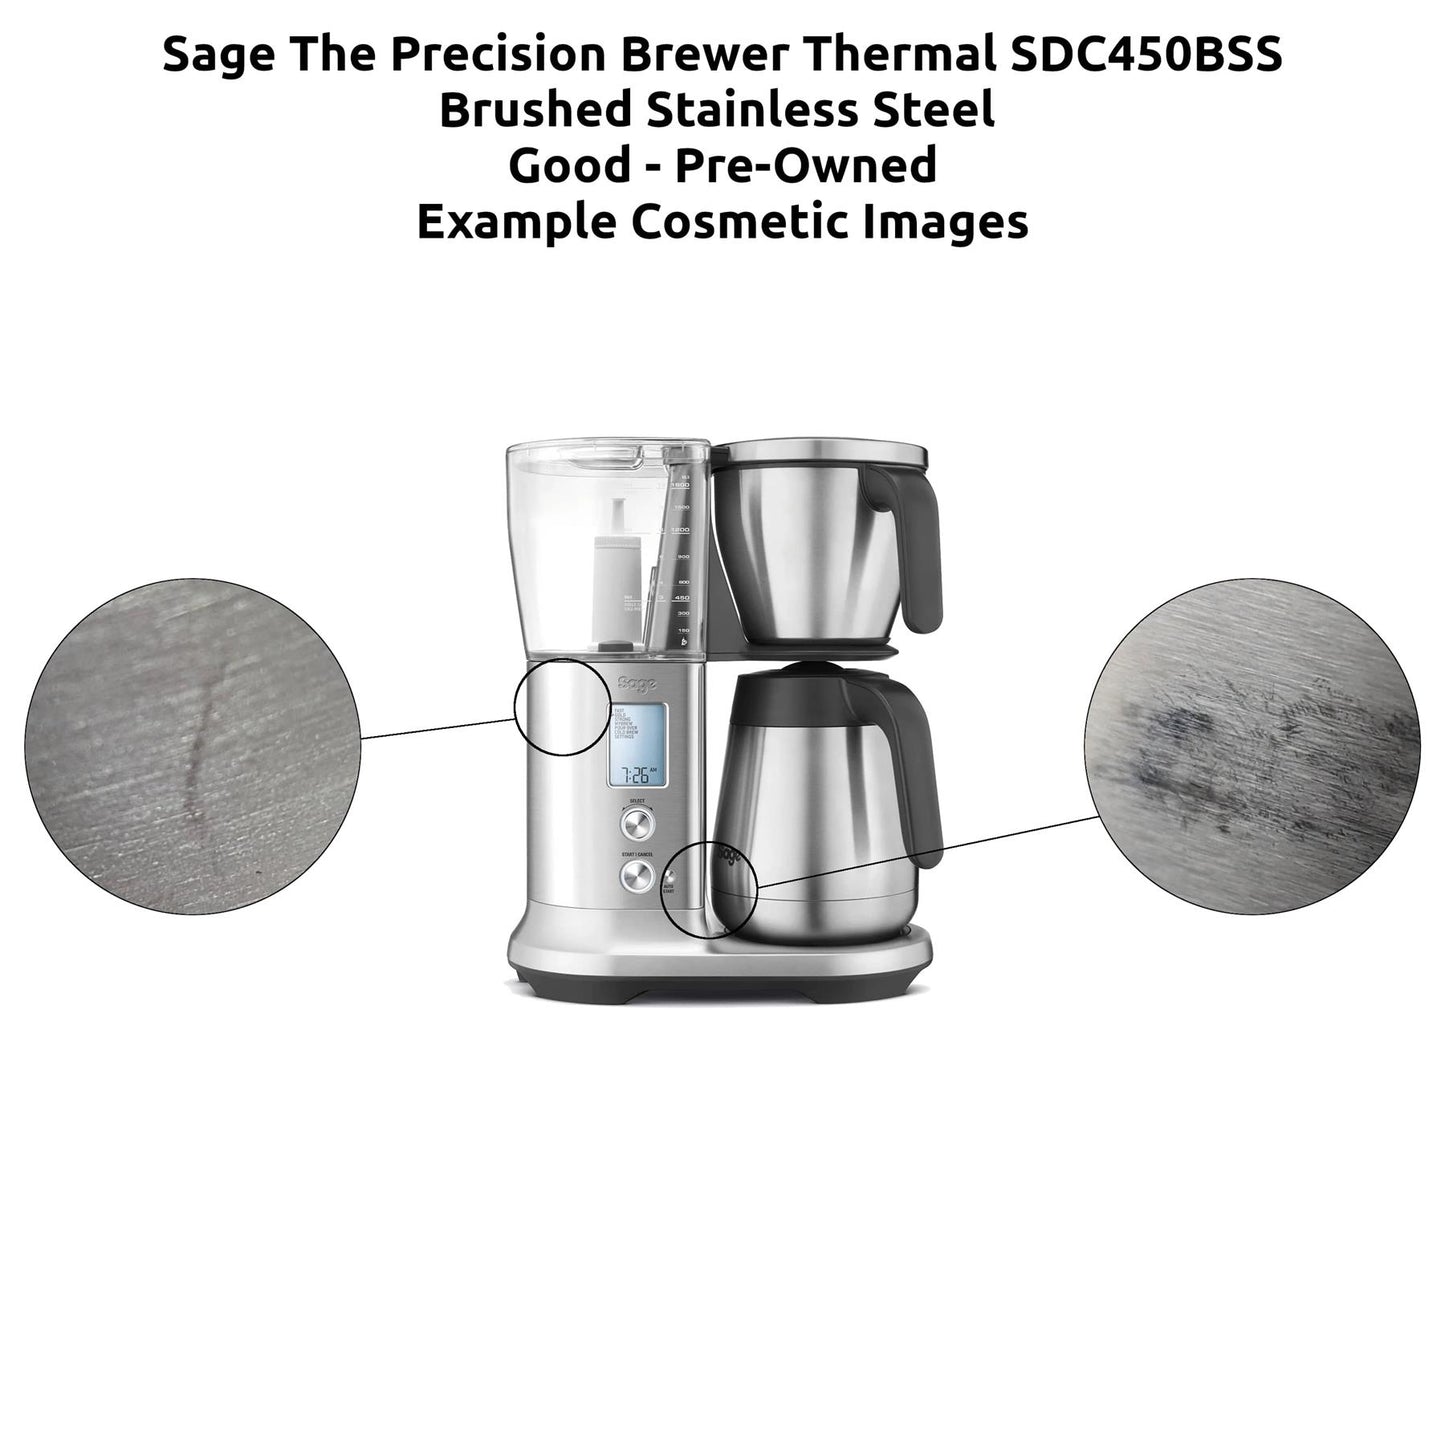 Sage The Precision Brewer Thermal SDC450 Coffee Maker